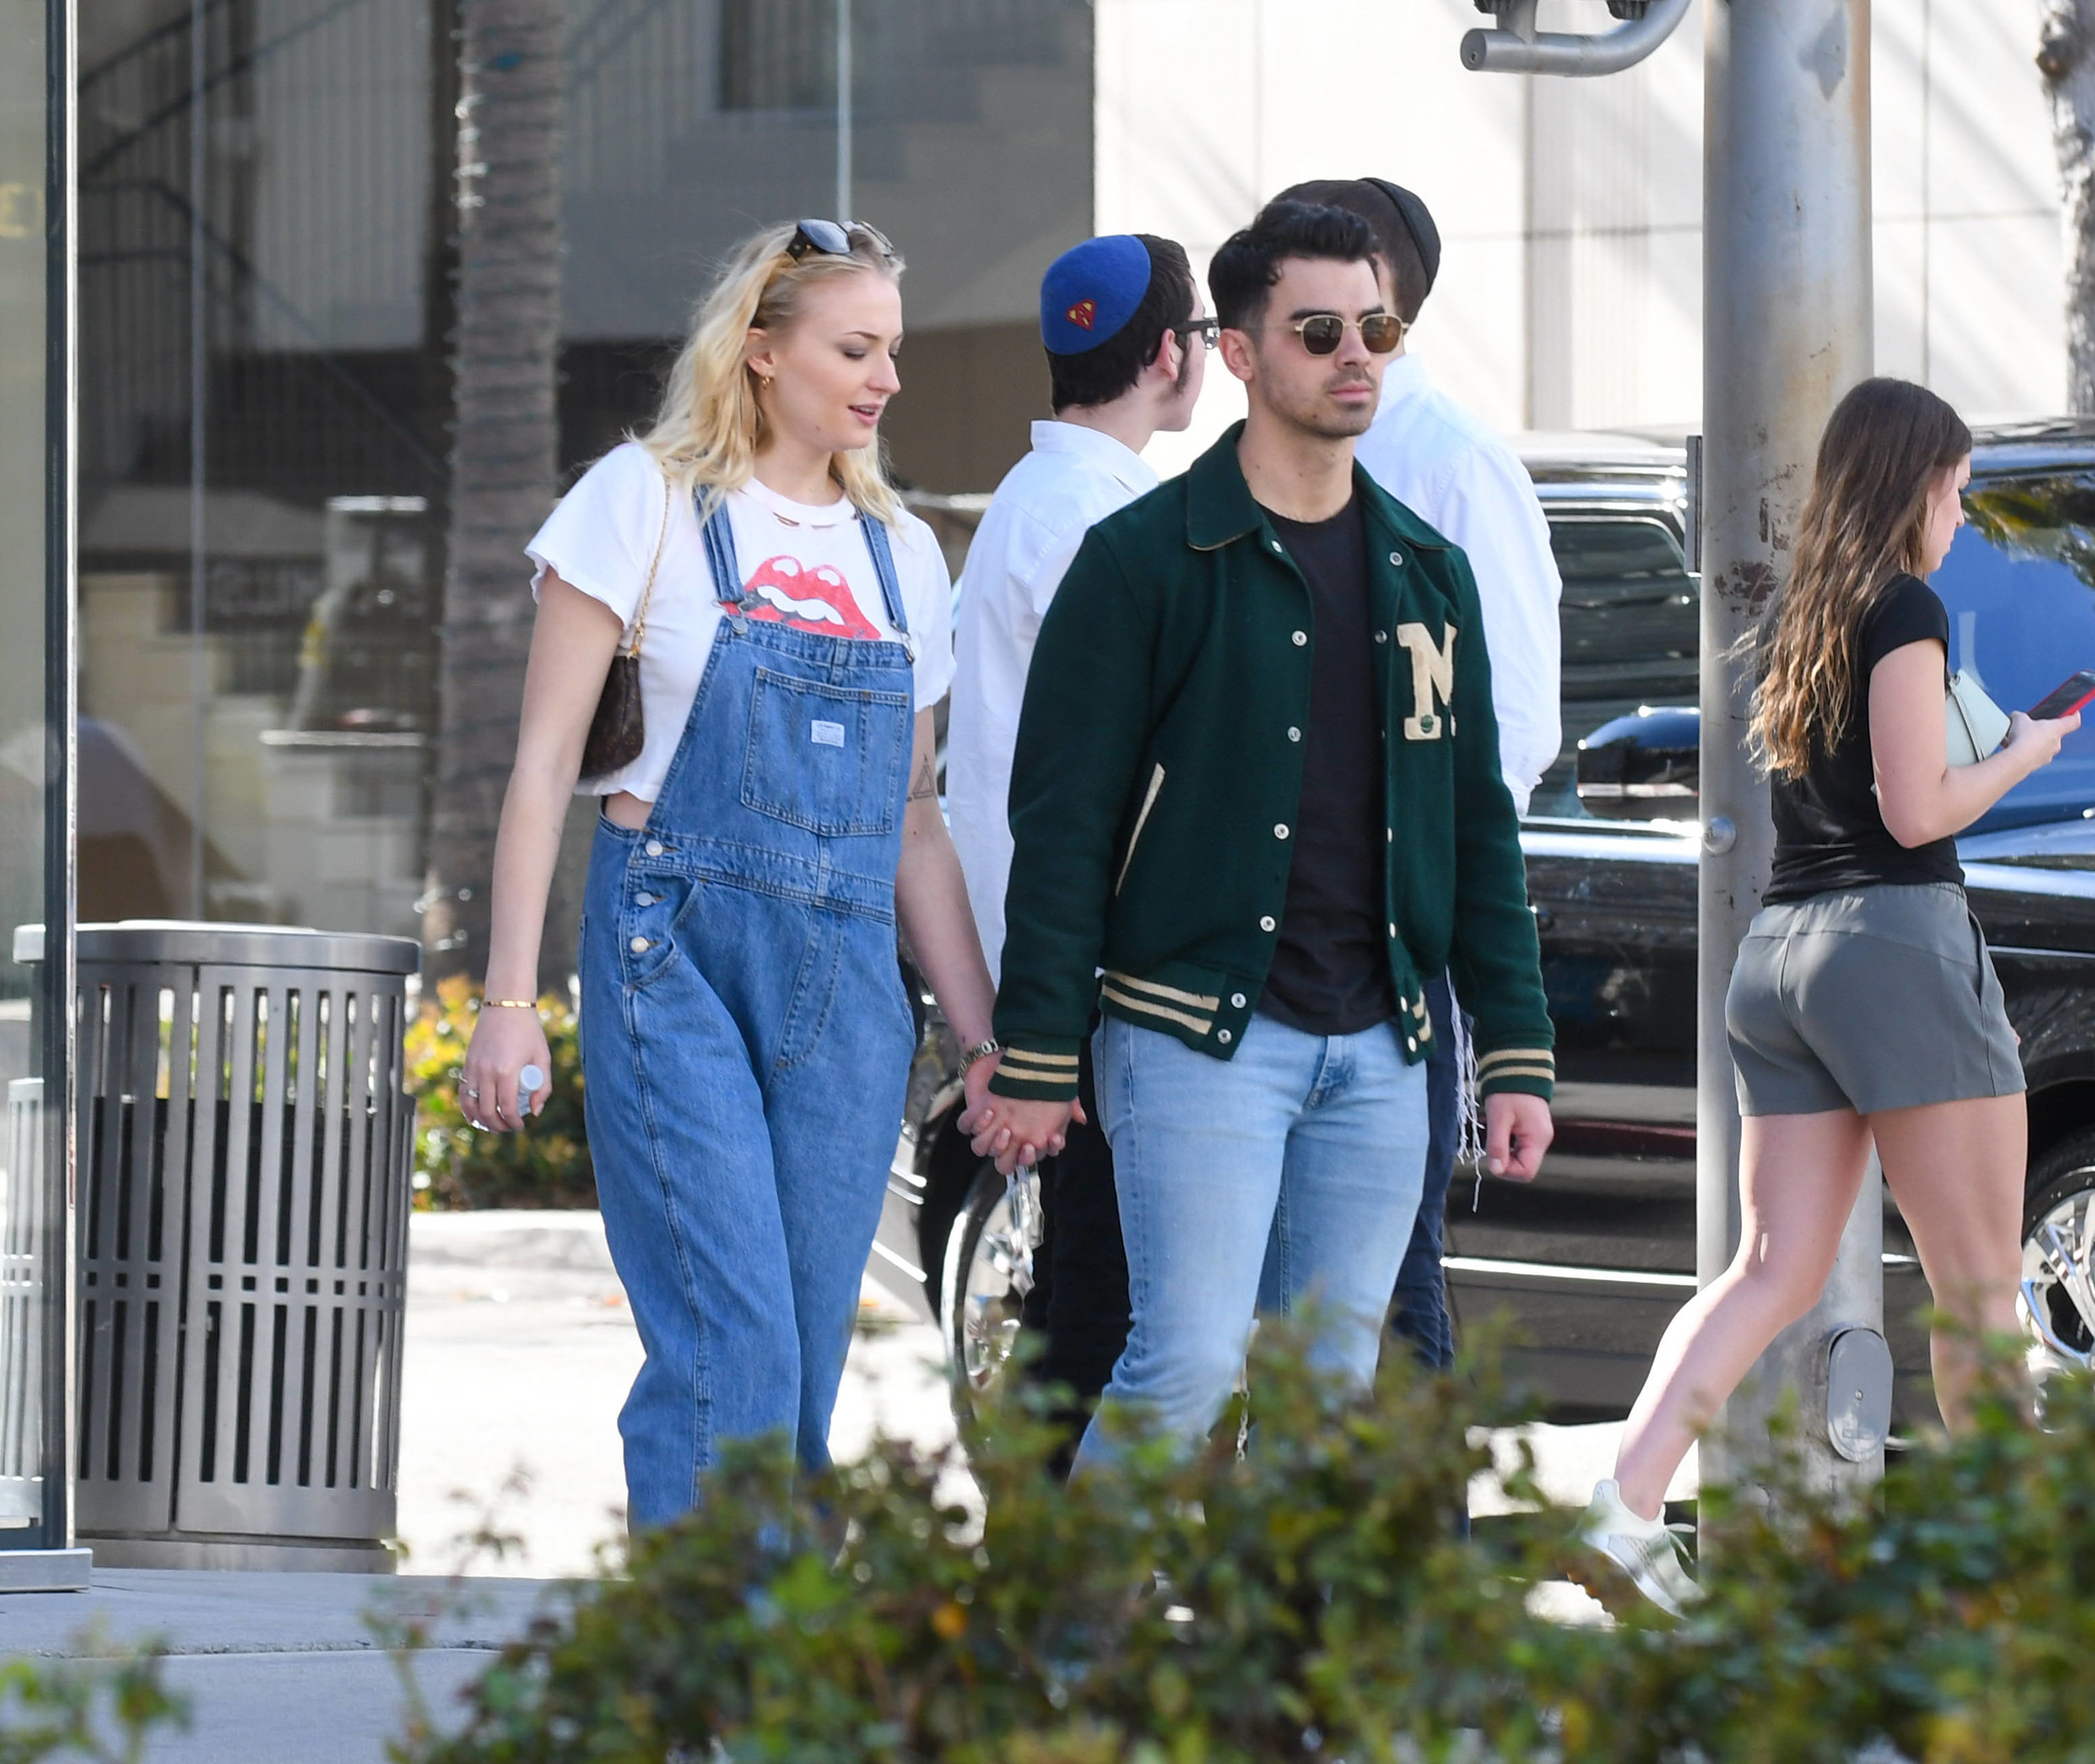 Joe and Sophie walk down the street and hold hands